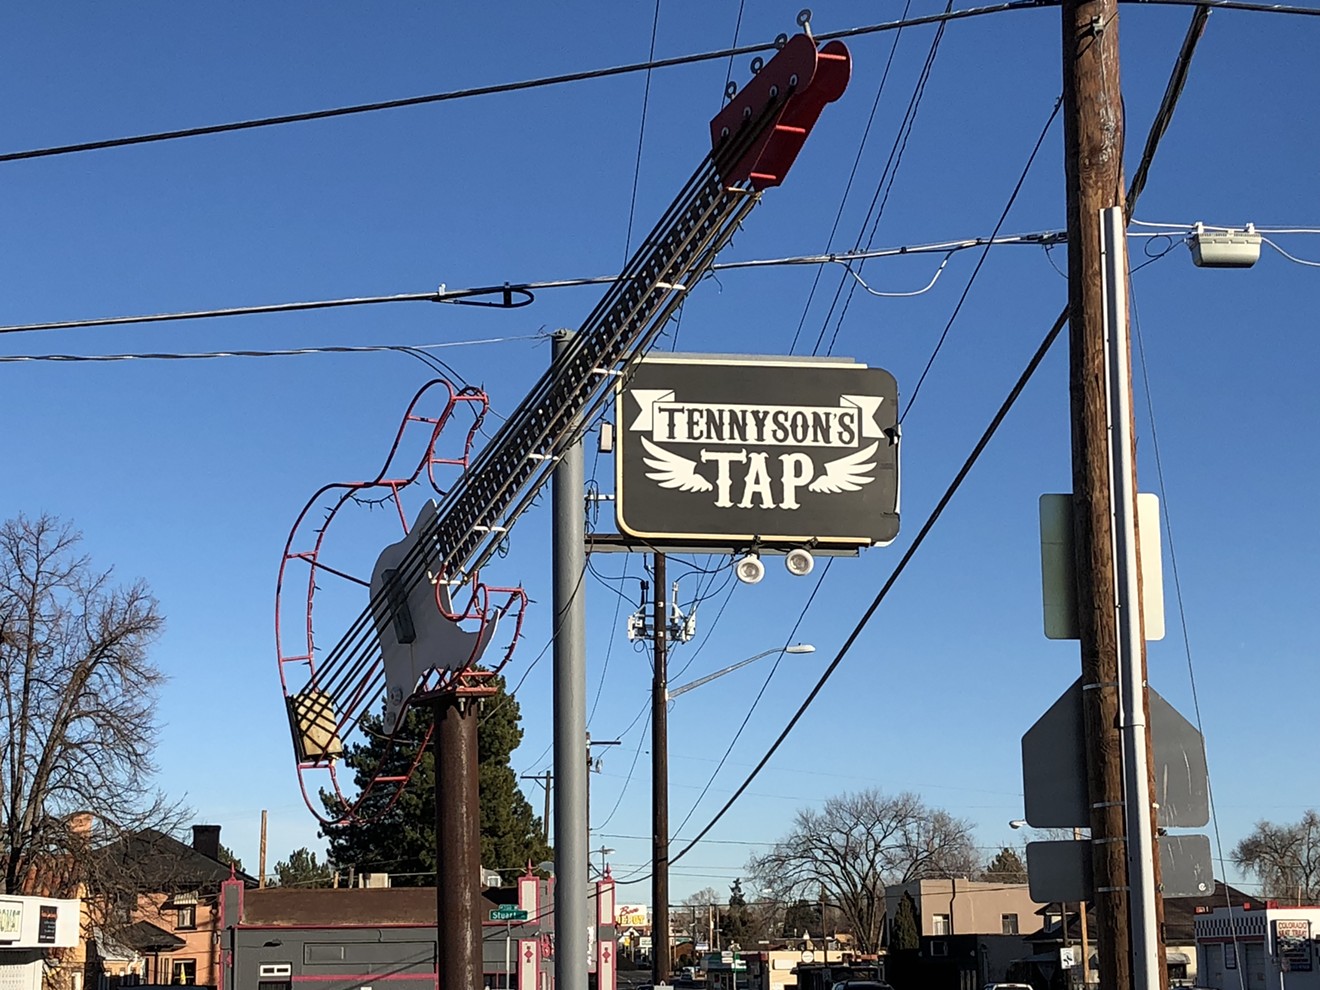 In case you don't already know about the music at Tennyson's Tap, this guitar sign helps you draw that conclusion.